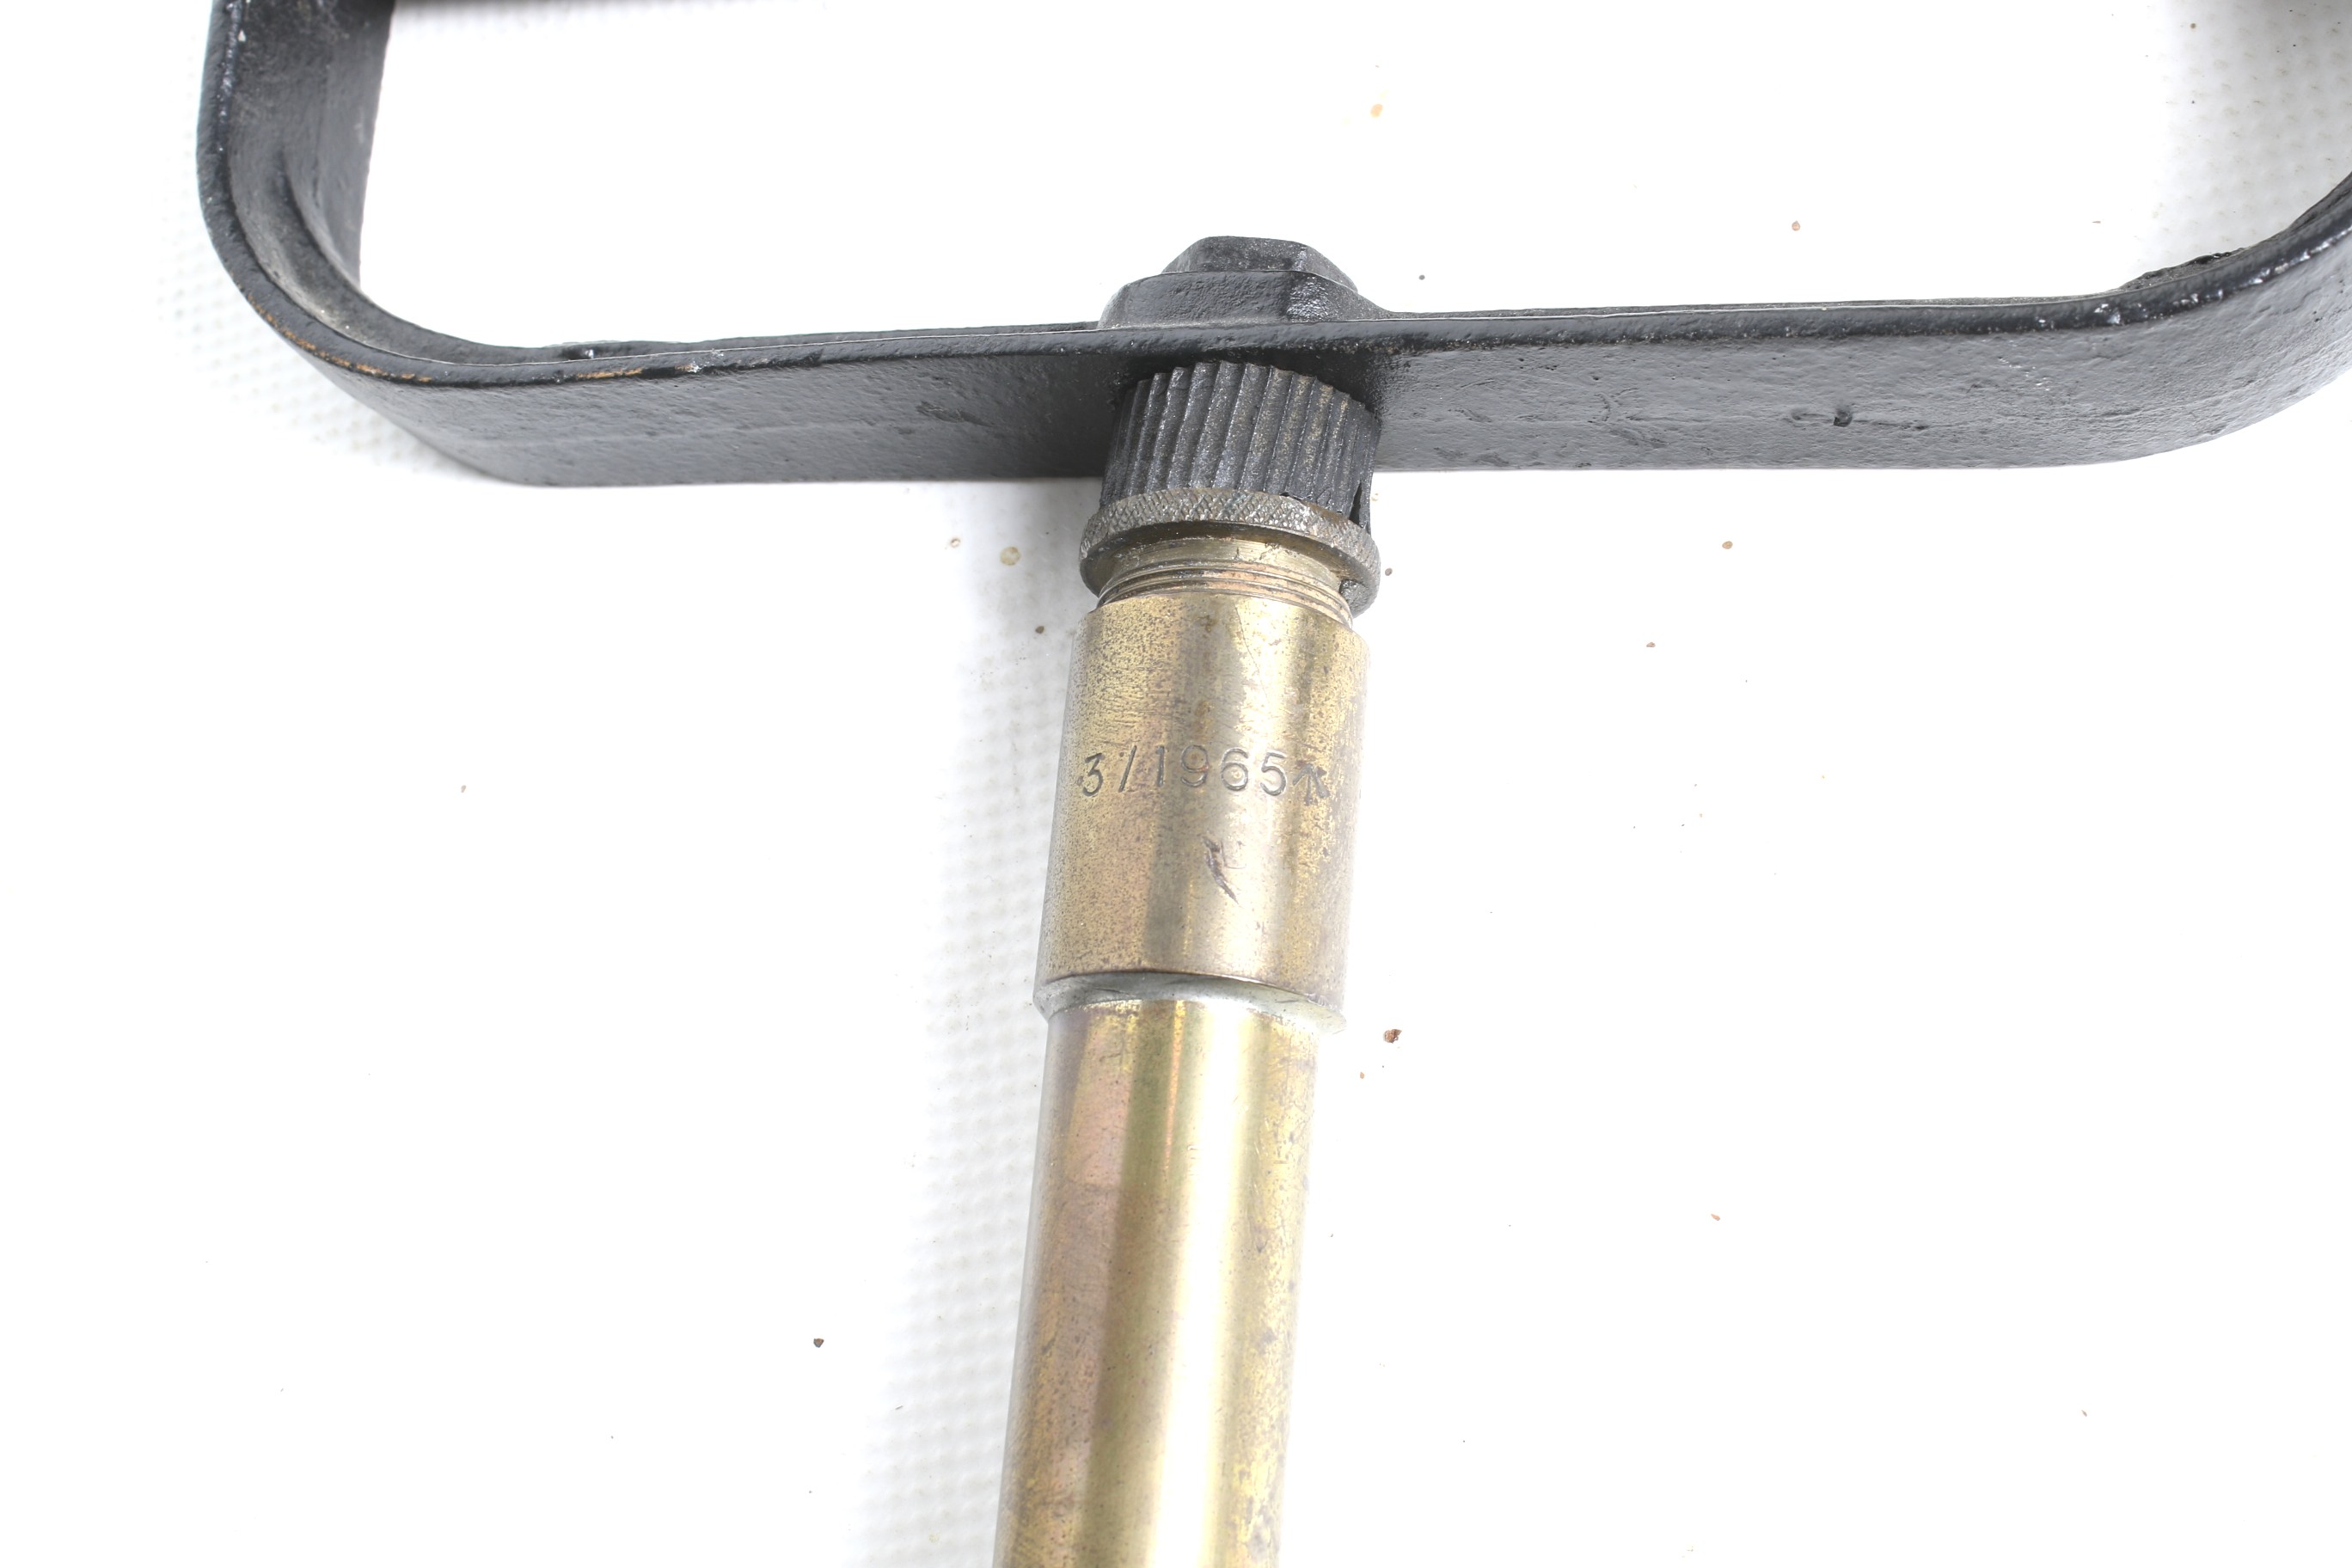 A 1965 British Army Dron-Wal stirrup pump. Marked 3/1965 and with arrow to shaft. - Image 3 of 3